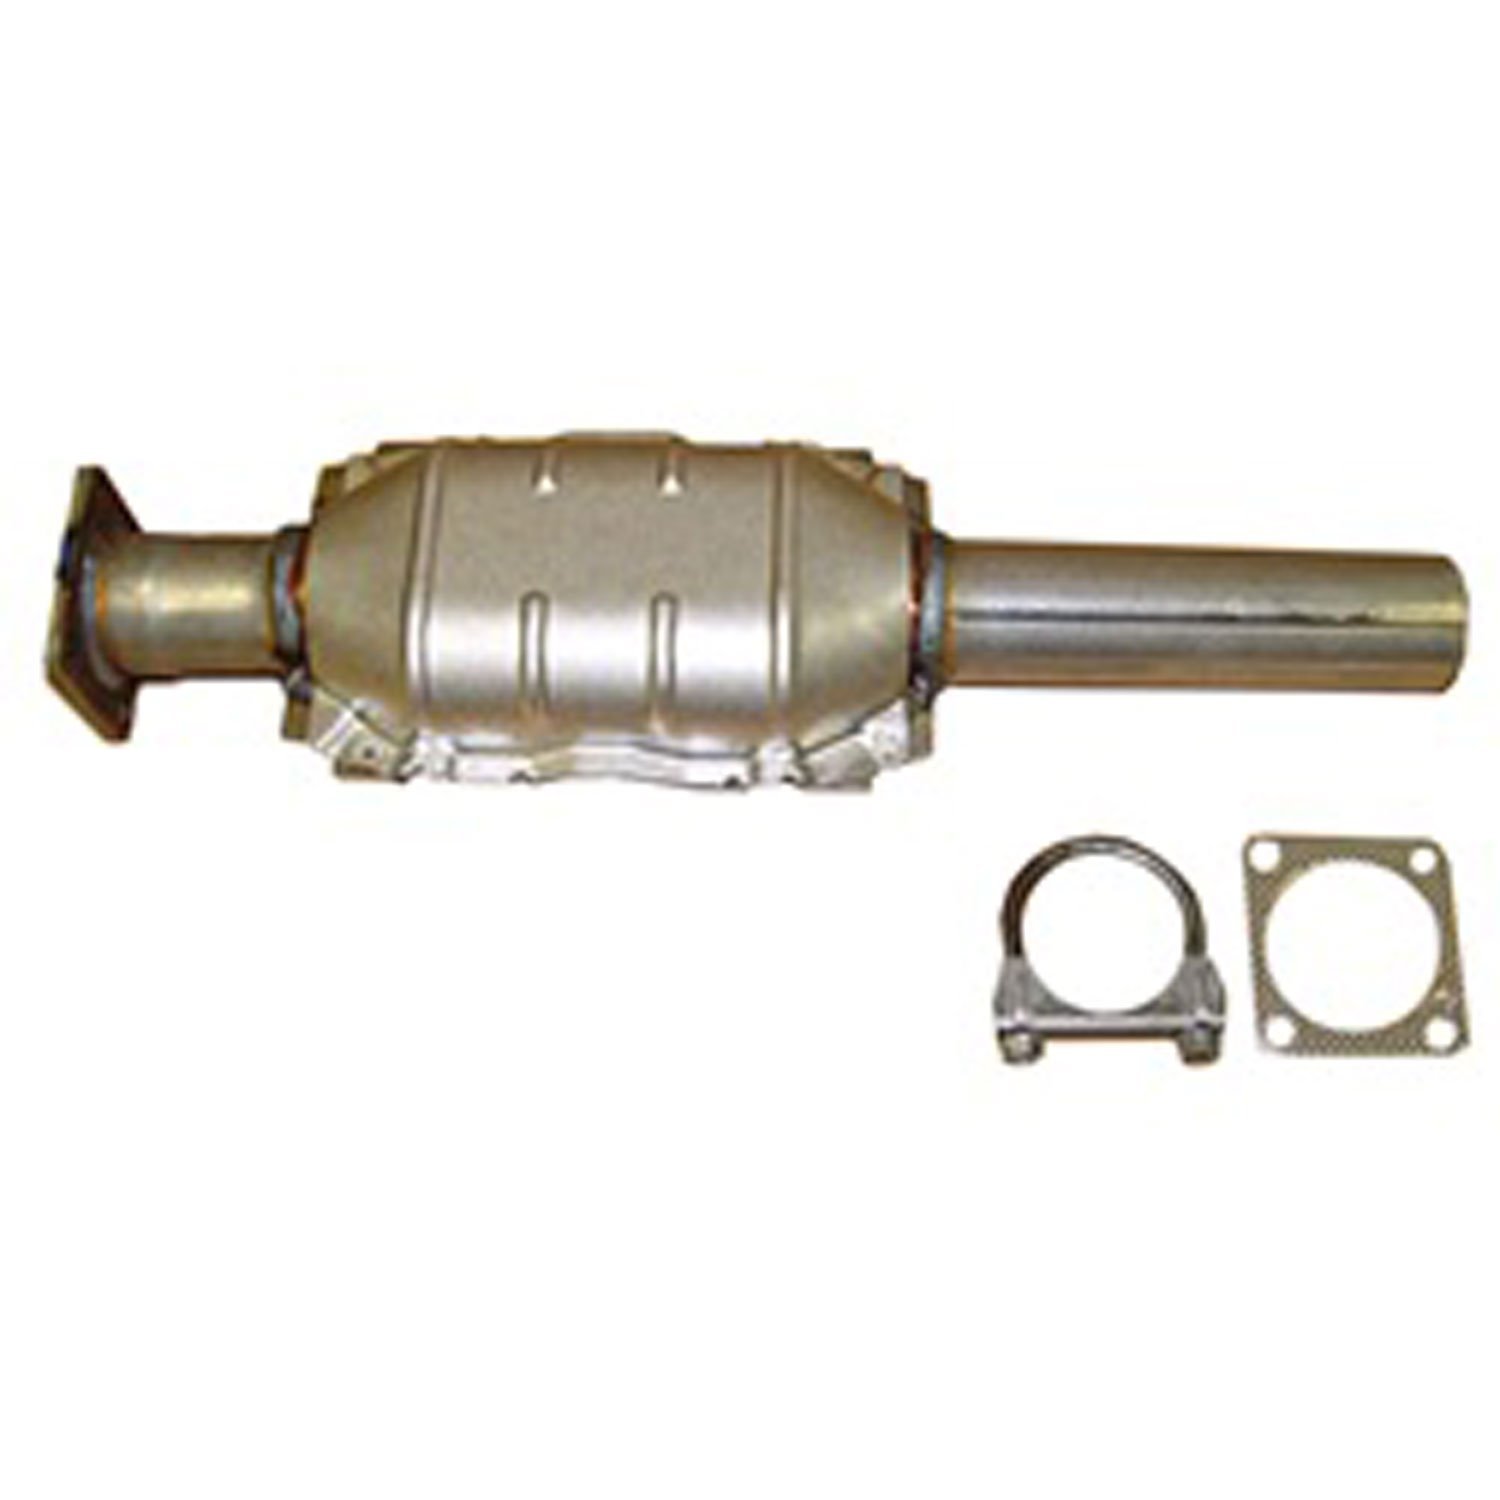 Replacement catalytic converter from Omix-ADA, Fits 93-95 Jeep Wrangler YJ and XJ Cherokees with a 2.5 or 4.0 liter engine.